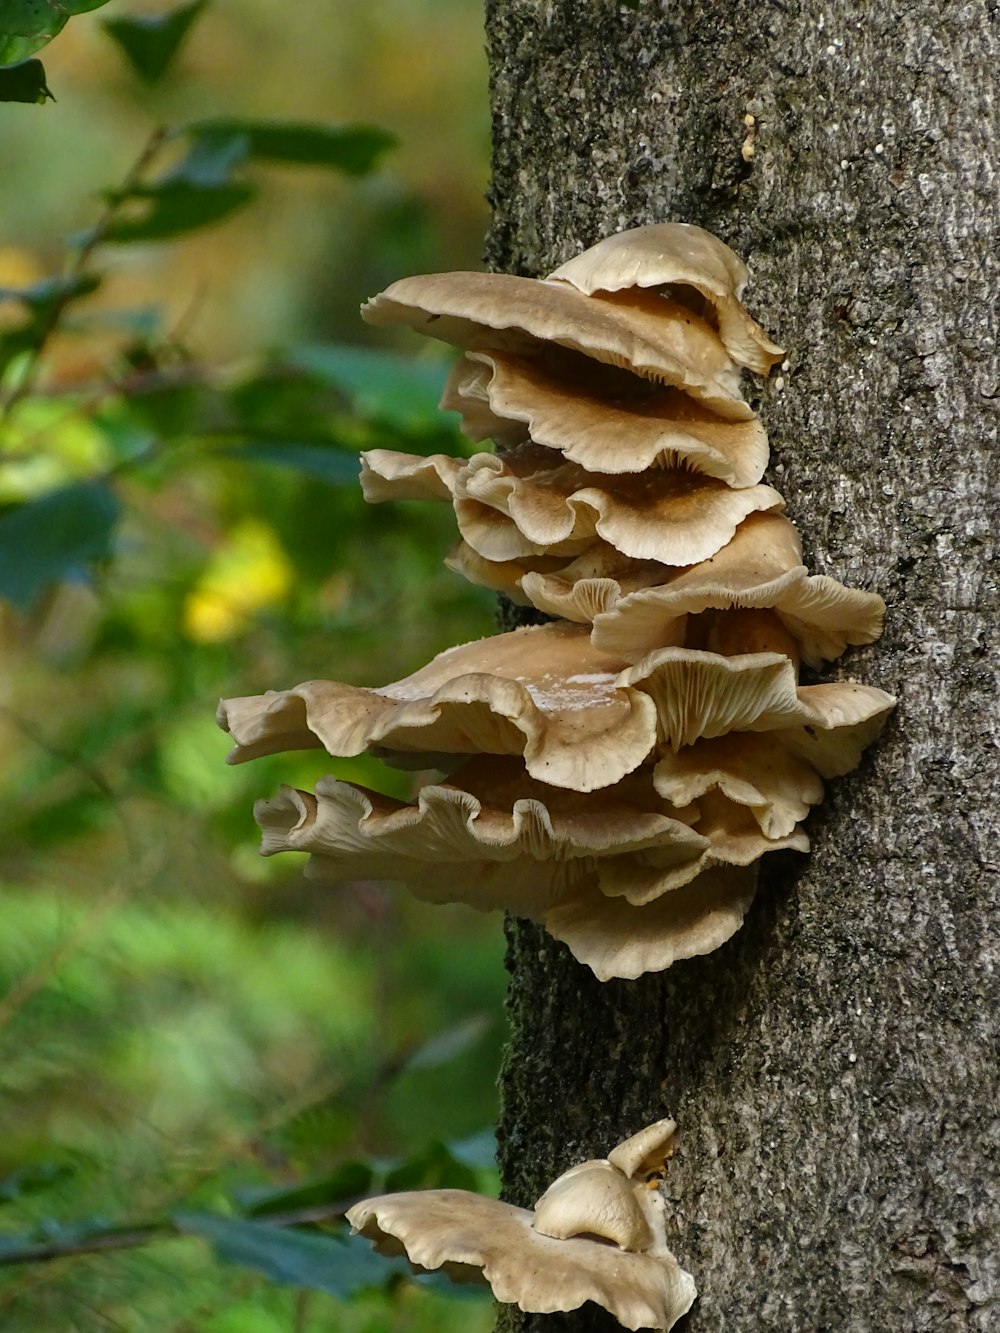 a close up of mushrooms growing on a tree